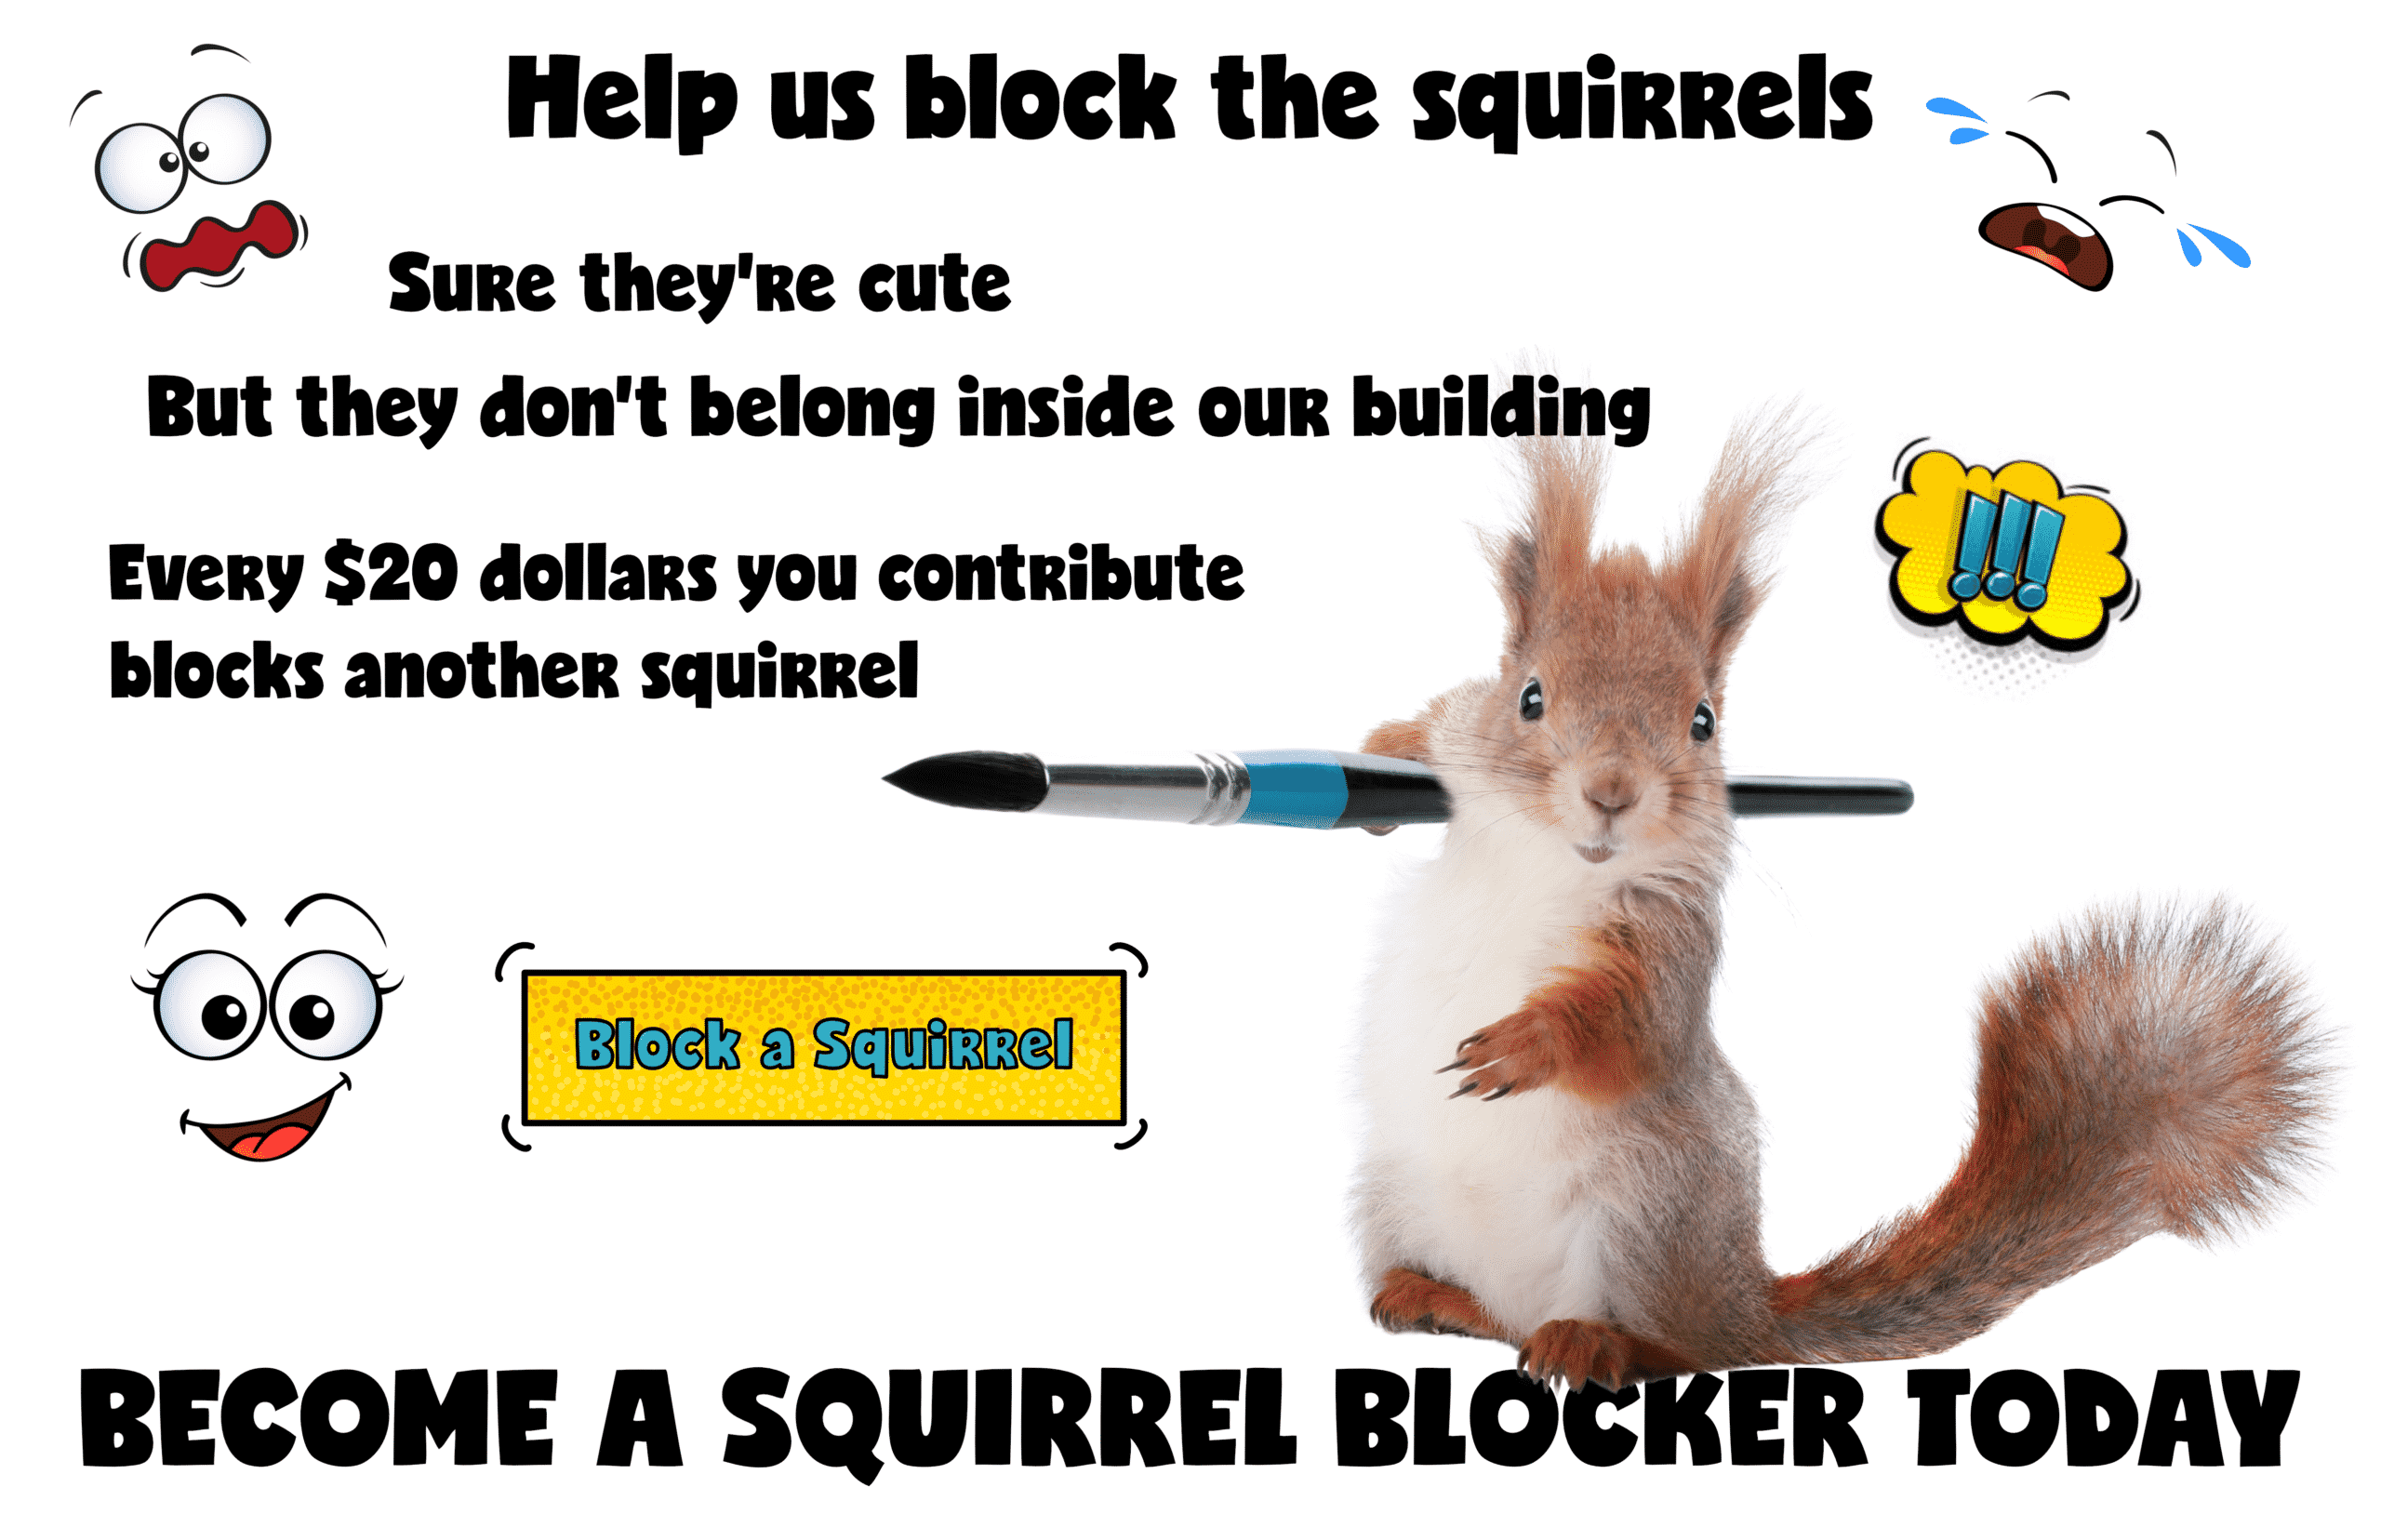 Donate to repair building and block the squirrels